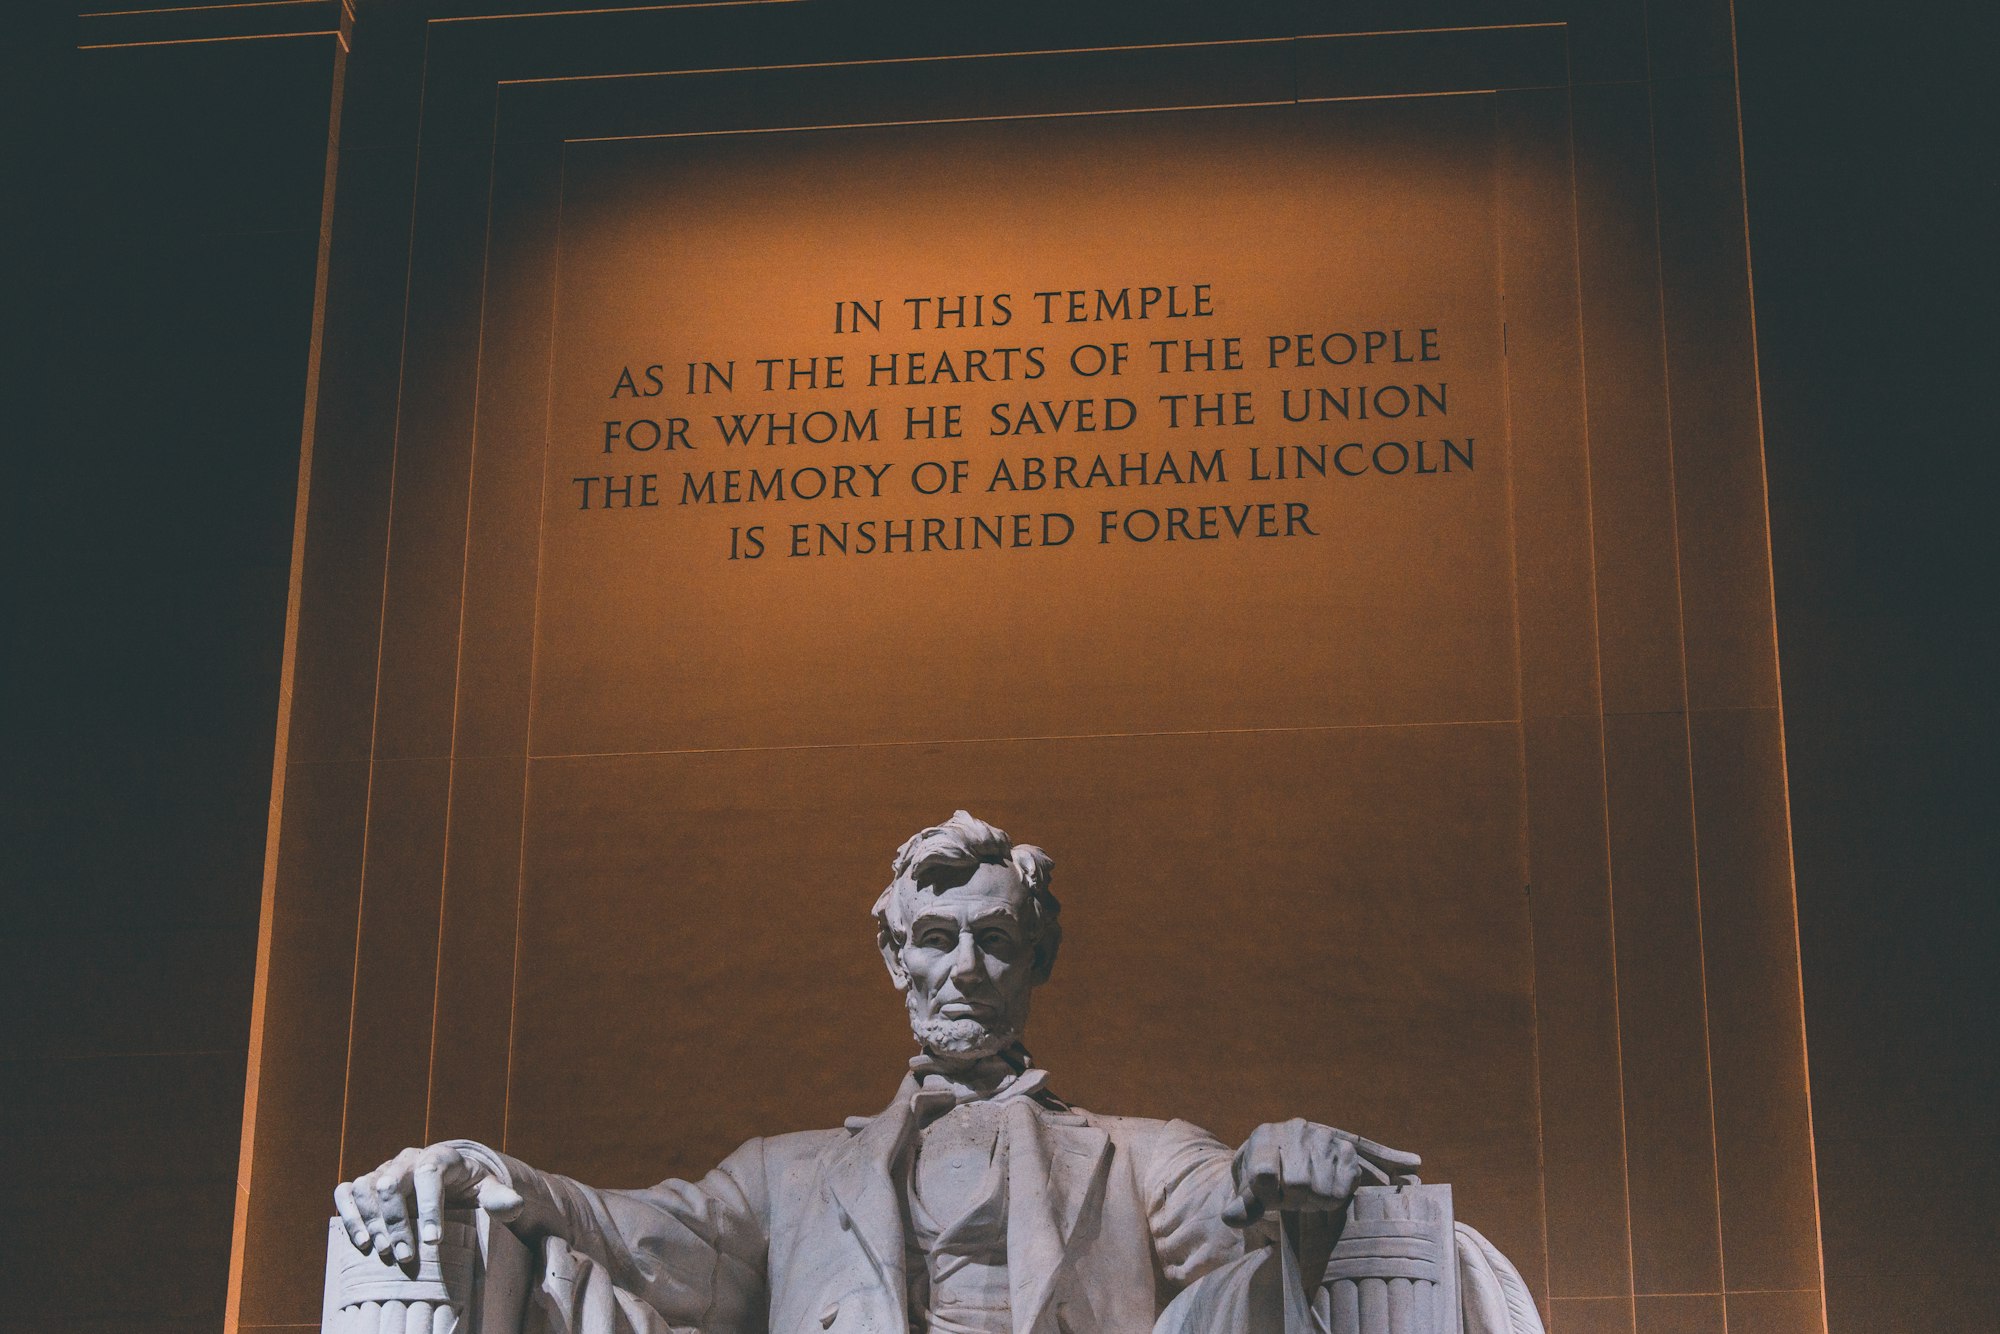 President Abraham Lincoln Was The First President From What Political Party?